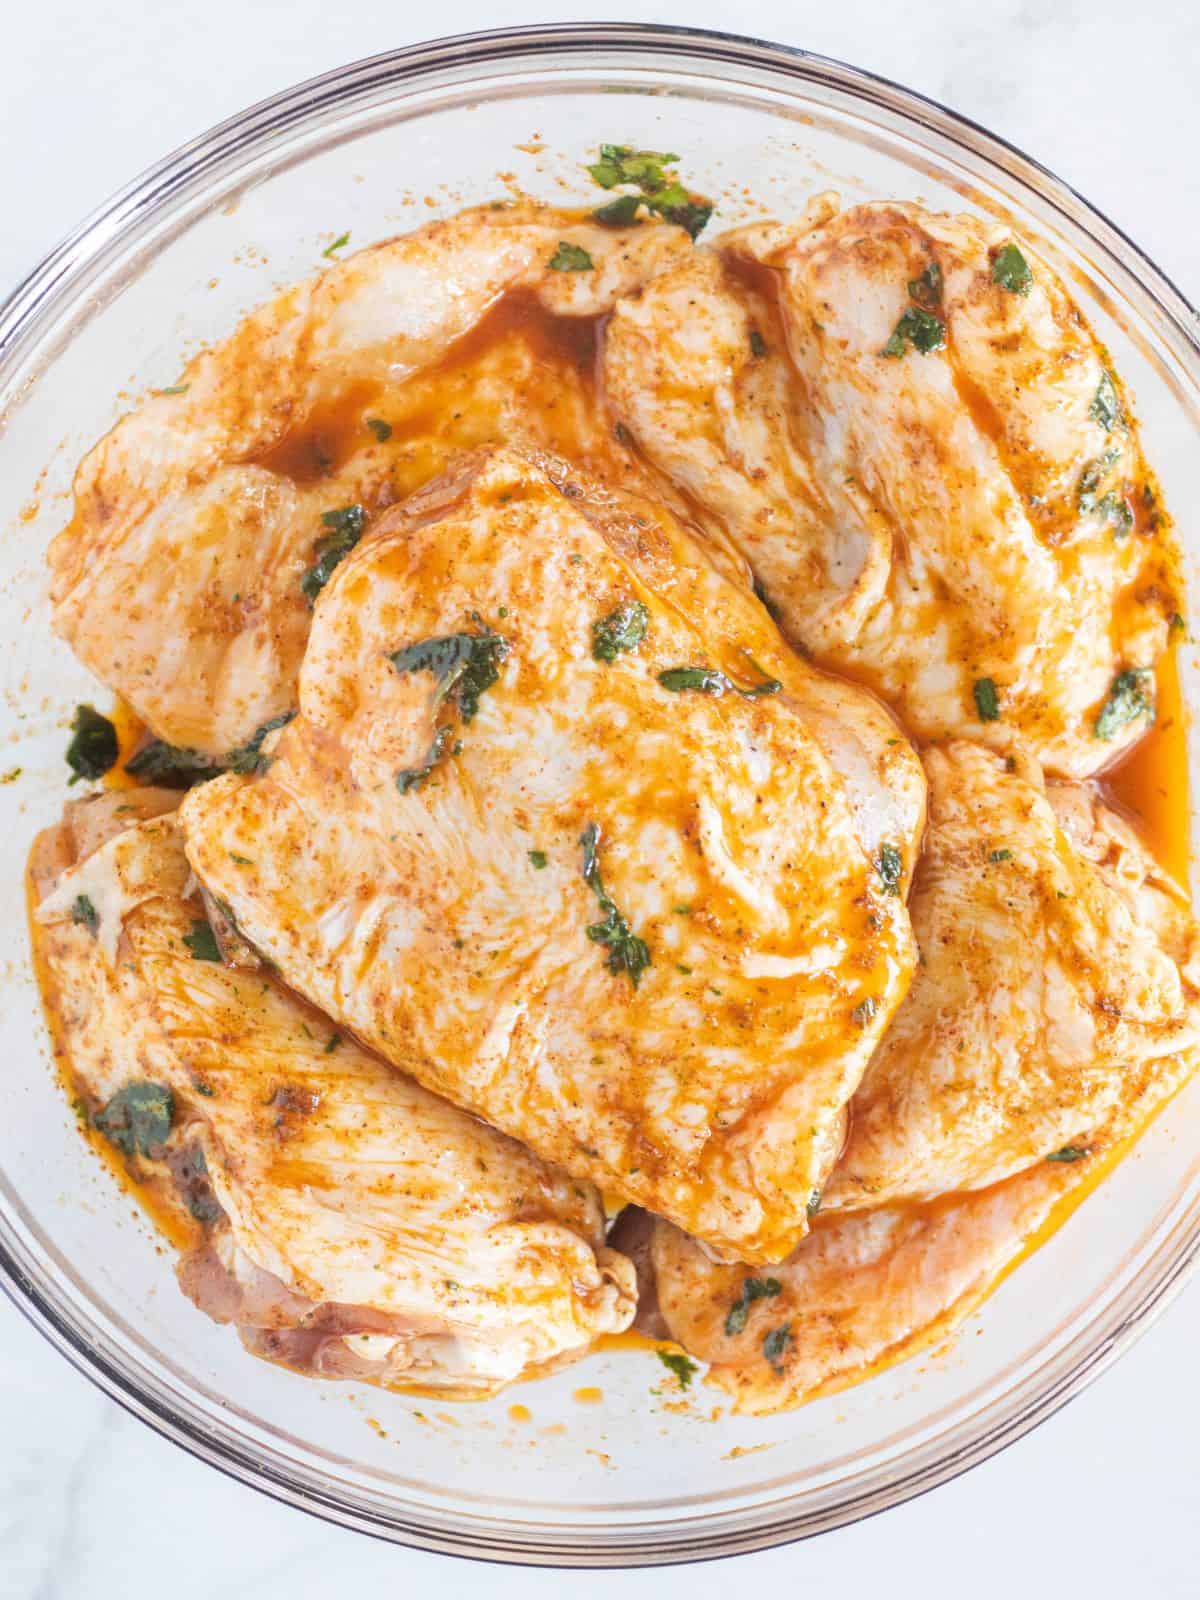 Chicken marinating in a clear bowl.